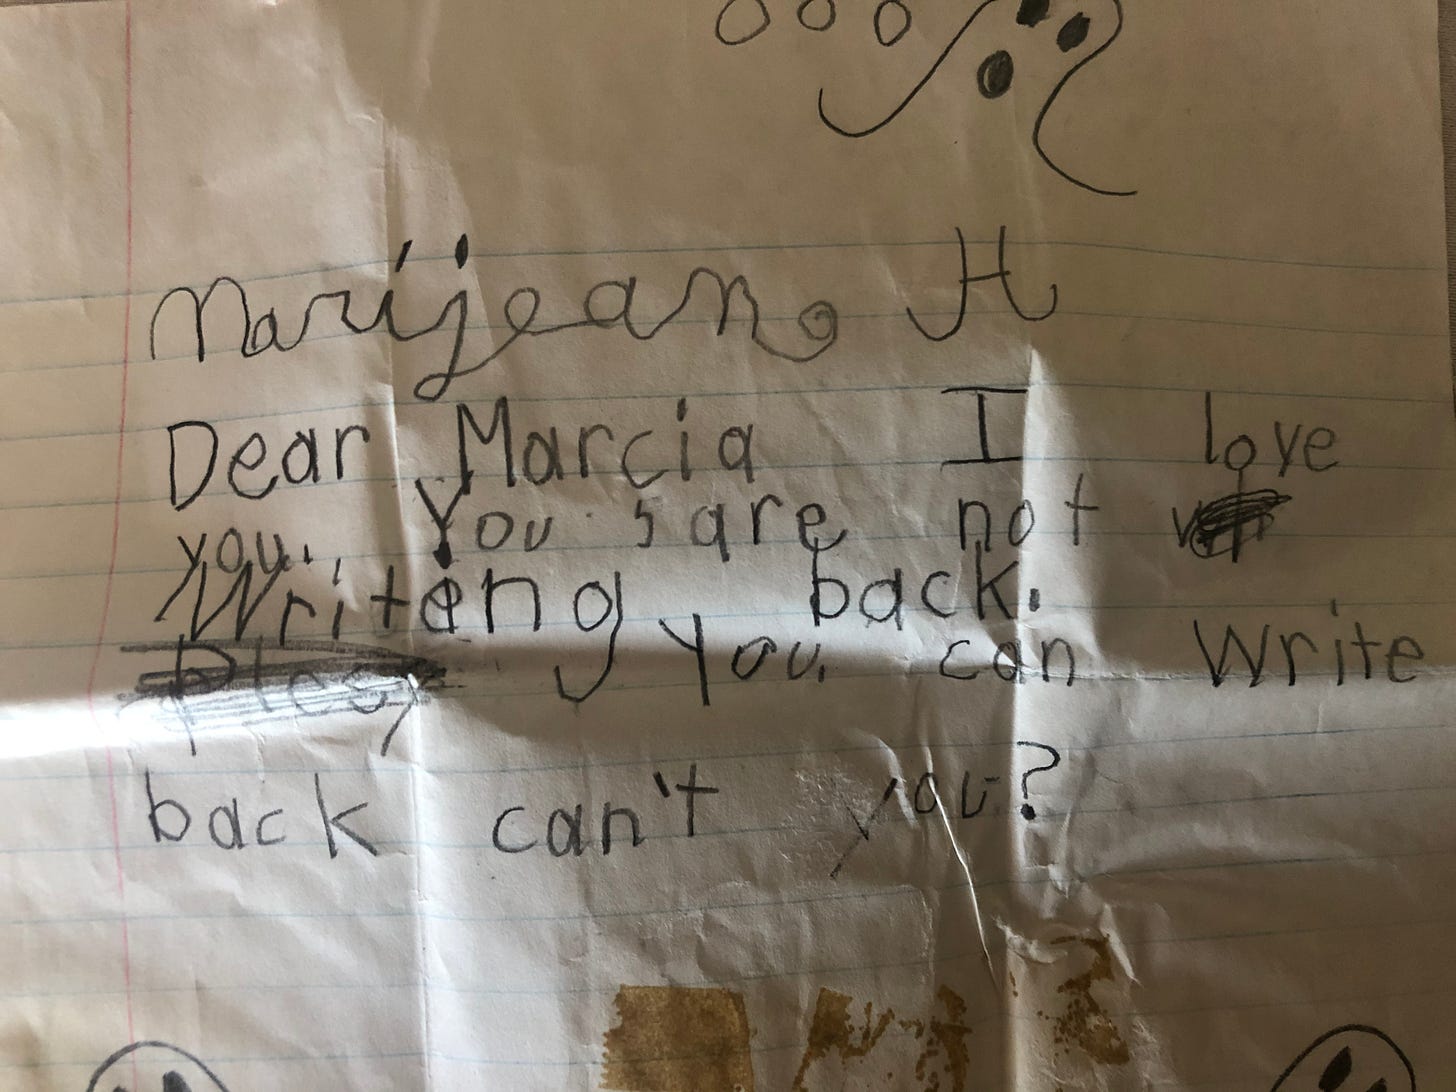 Letter written by the author, age 4, to her sister in college: Dear Marcia, I love you. You are not writing back. You can write back can't you?